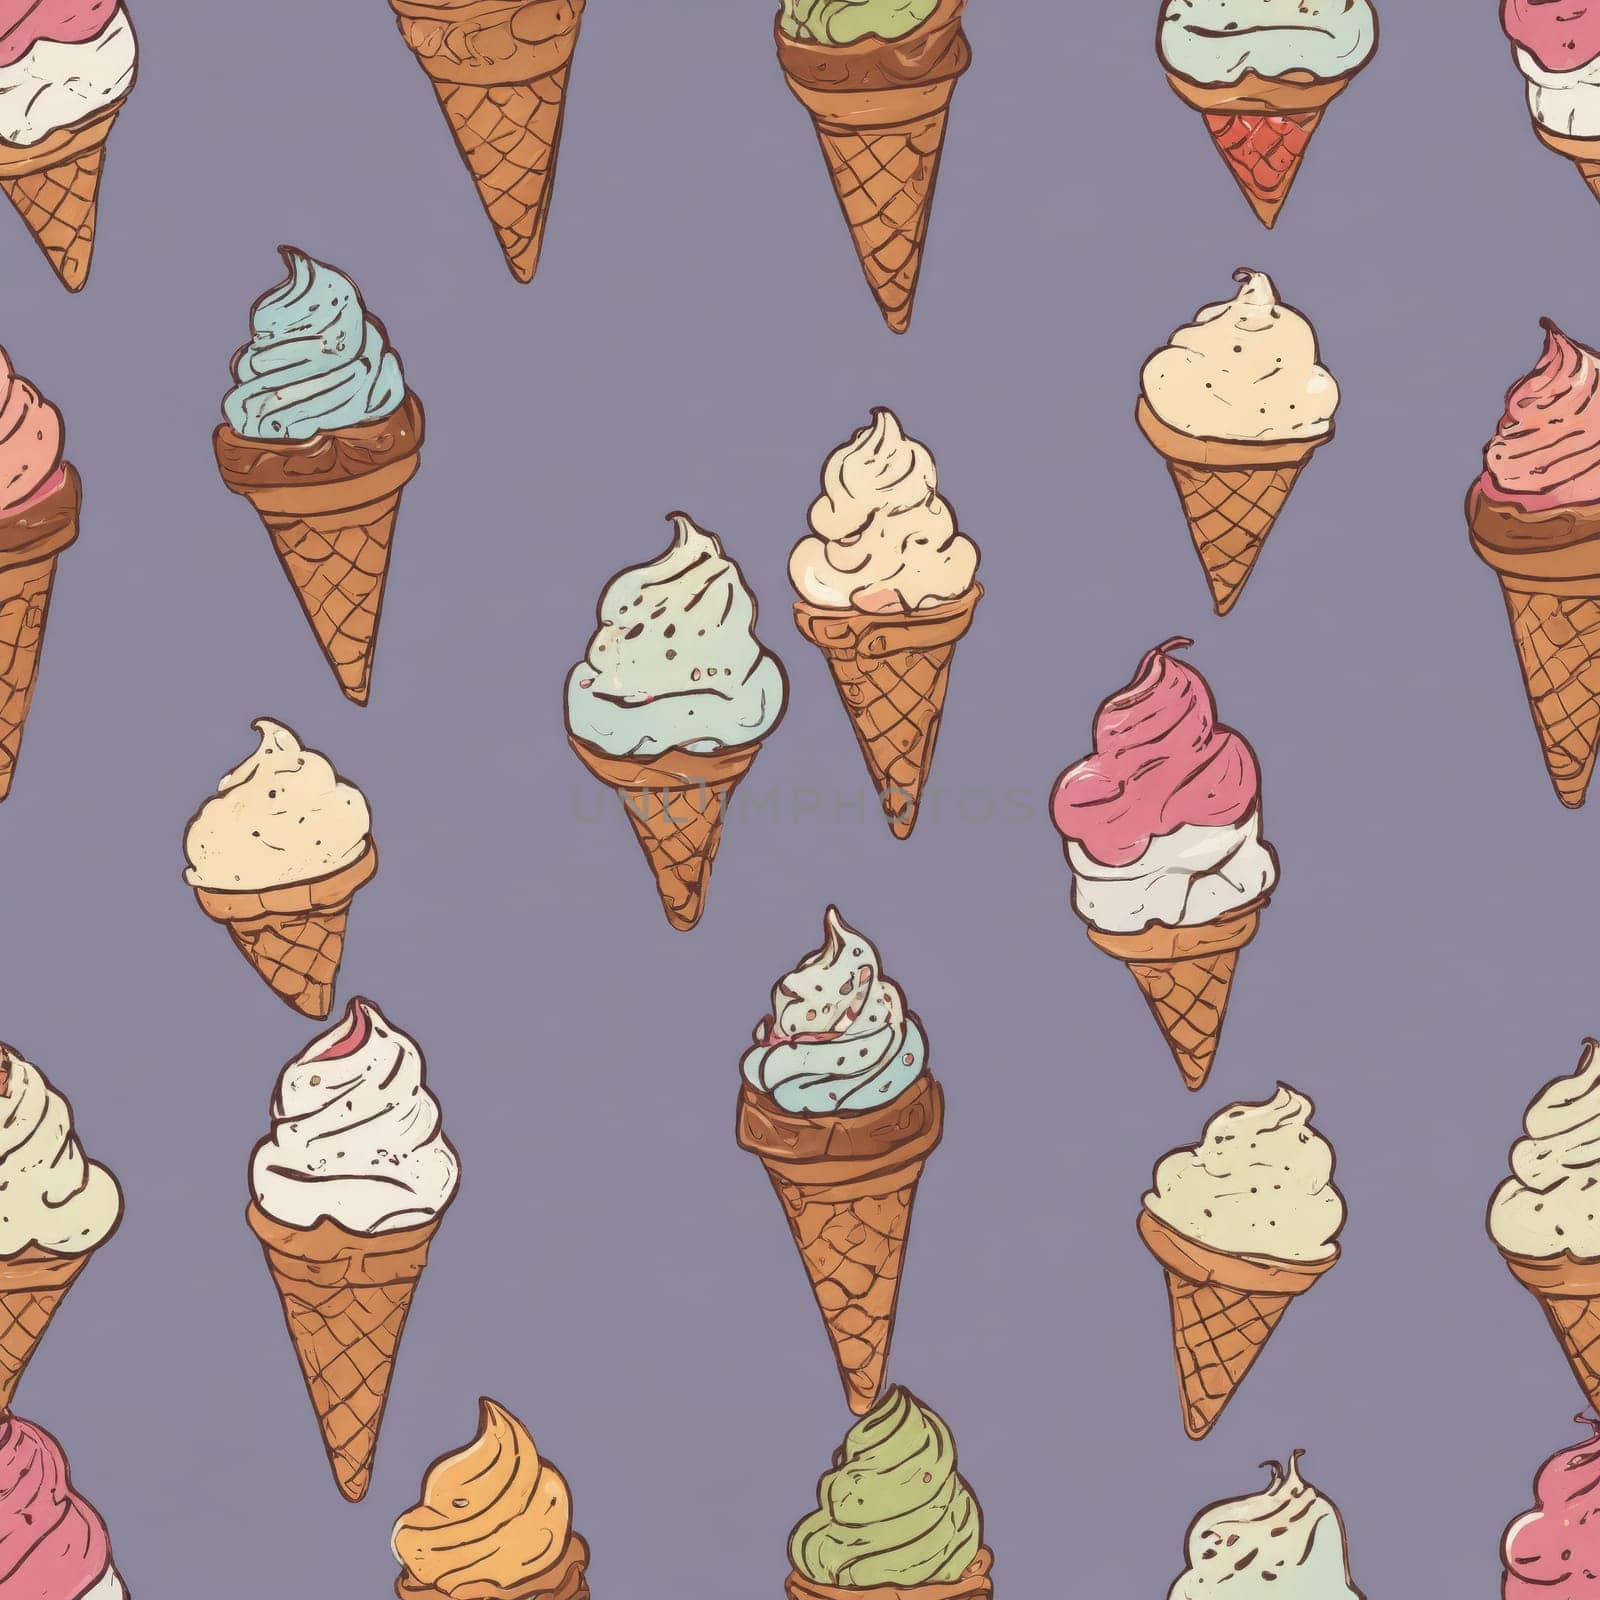 Hand-drawn and full of whimsy, various cartoon ice cream cones offer a sweet escape on a pastel purple background.